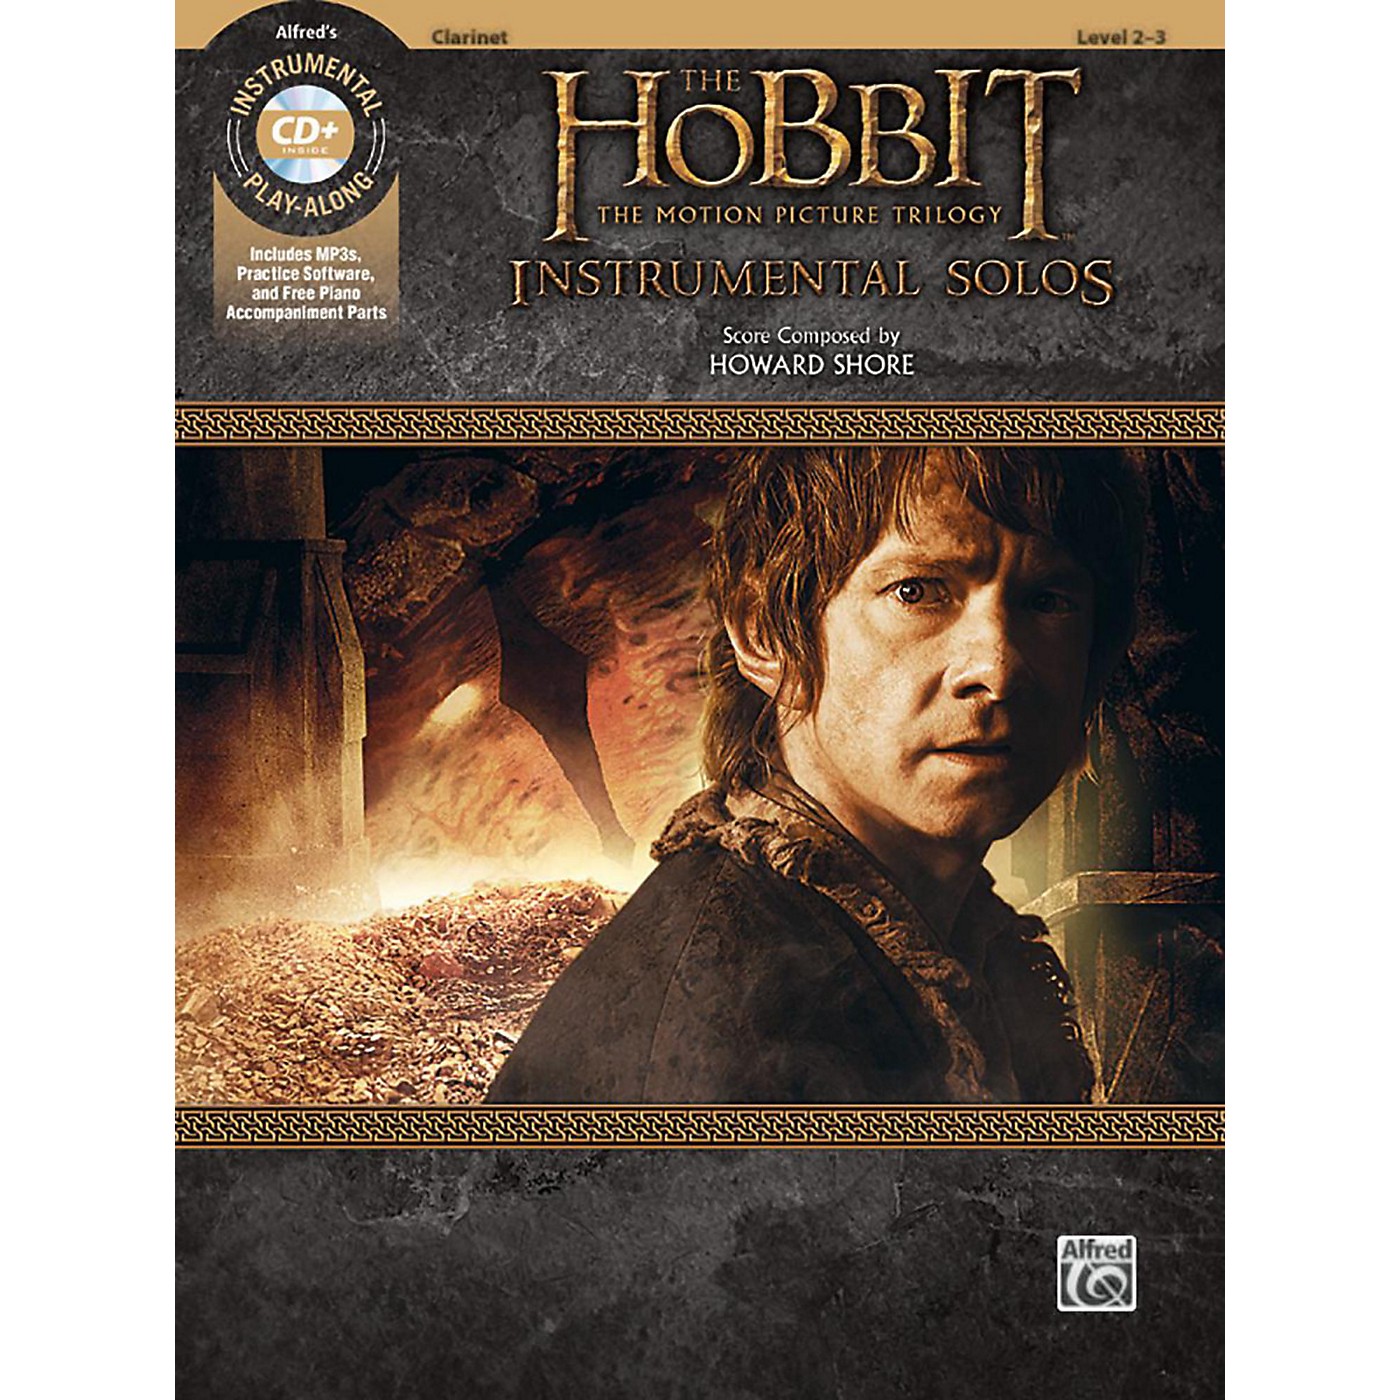 Alfred The Hobbit - The Motion Picture Trilogy Instrumental Solos Clarinet Book & CD Level 2-3 Songbook thumbnail